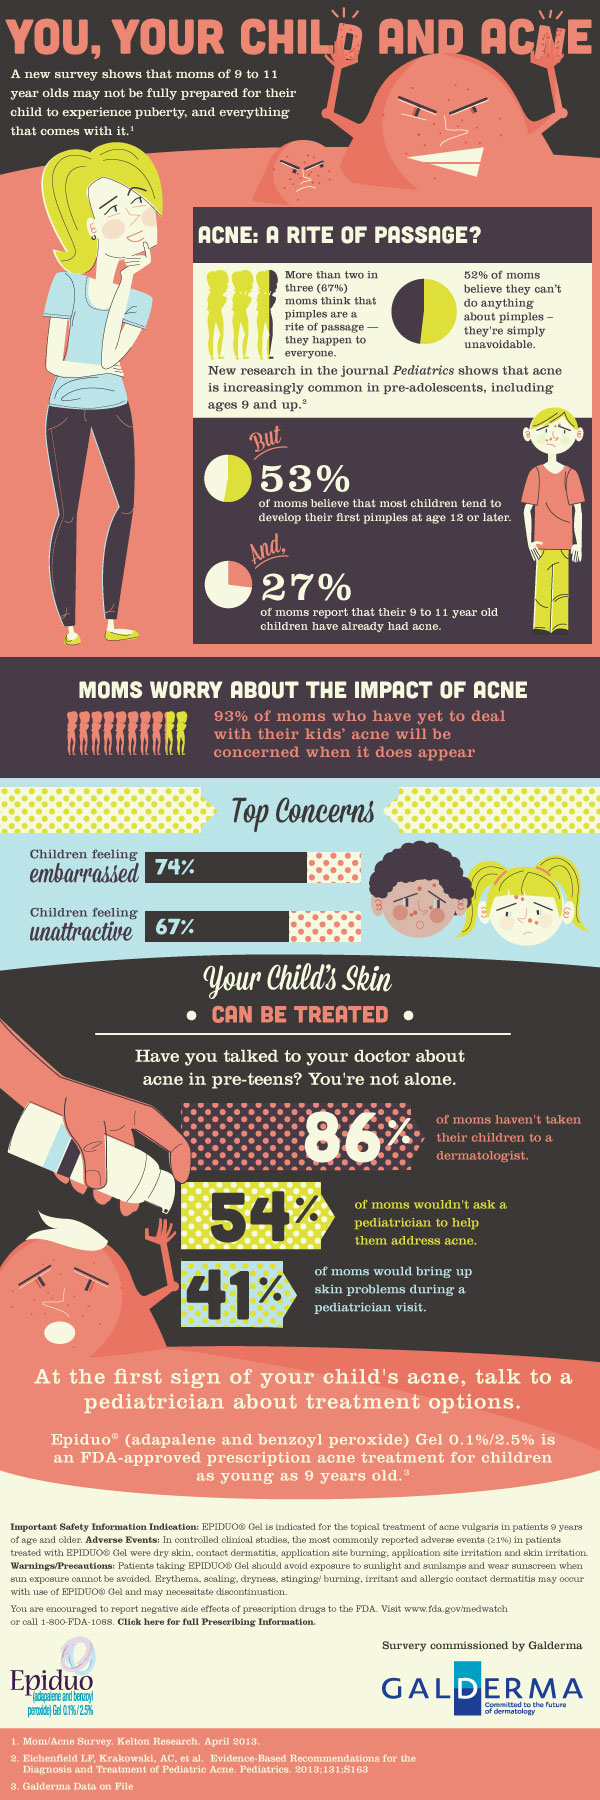 You, your child and acne